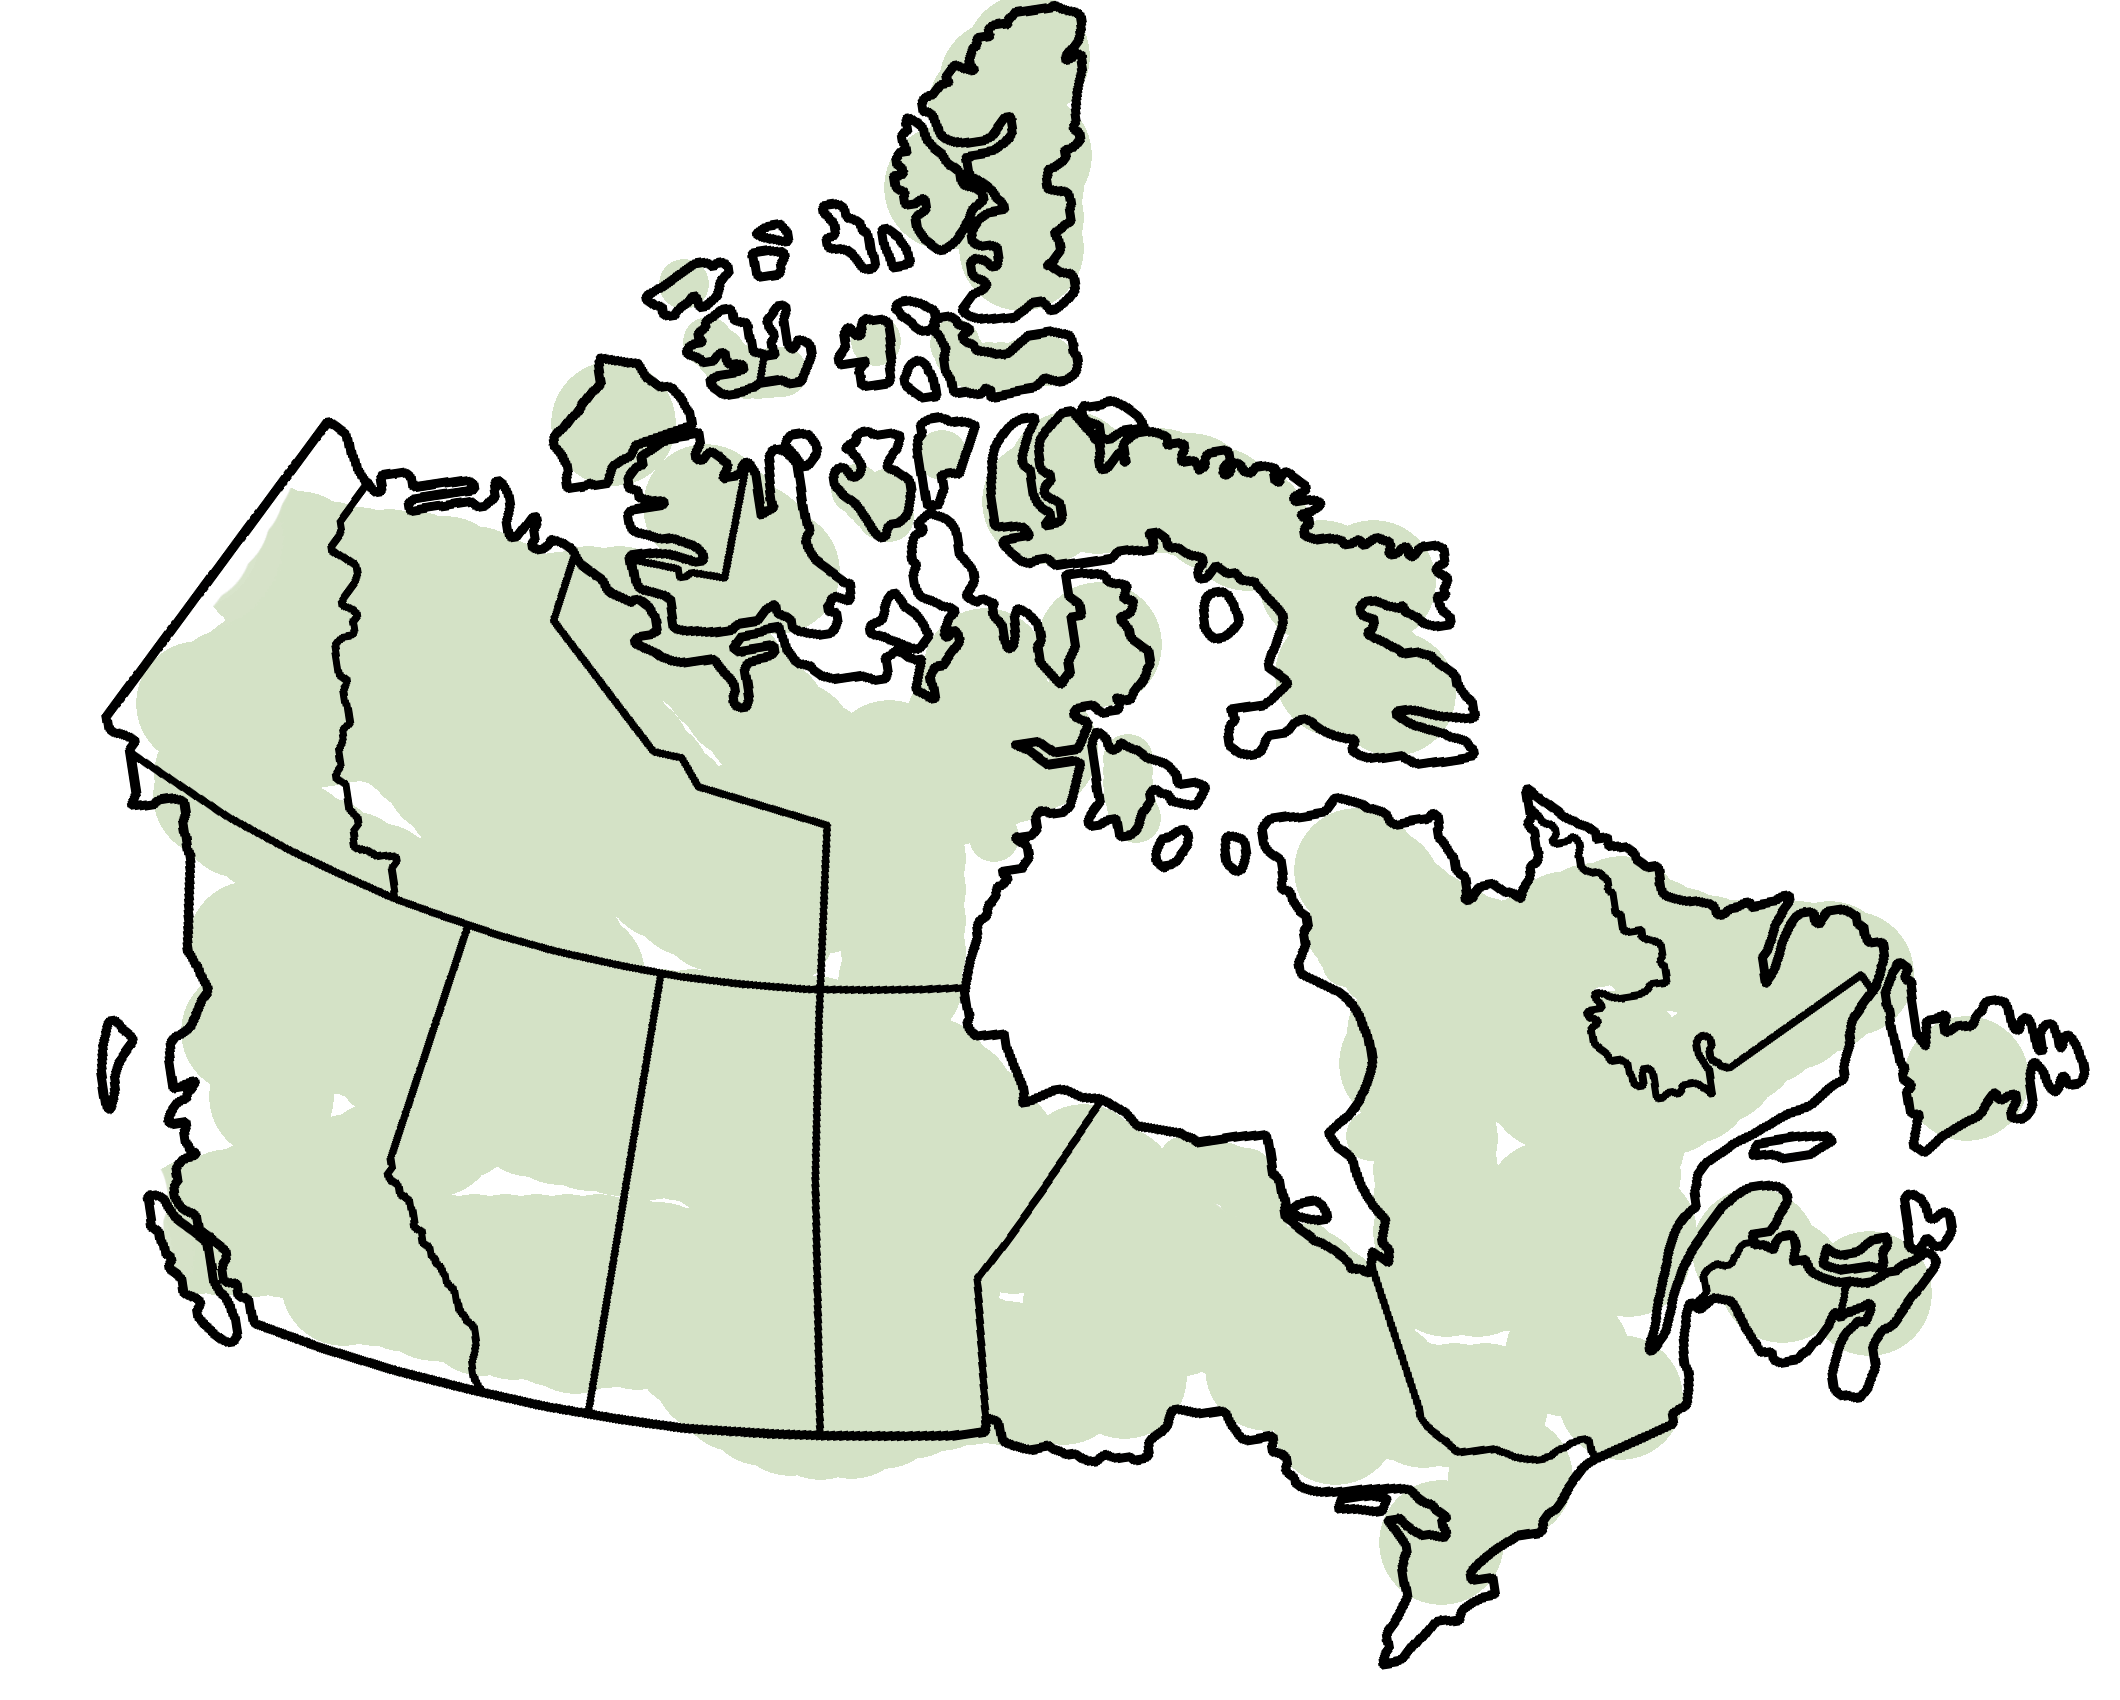 Animated map of Canada